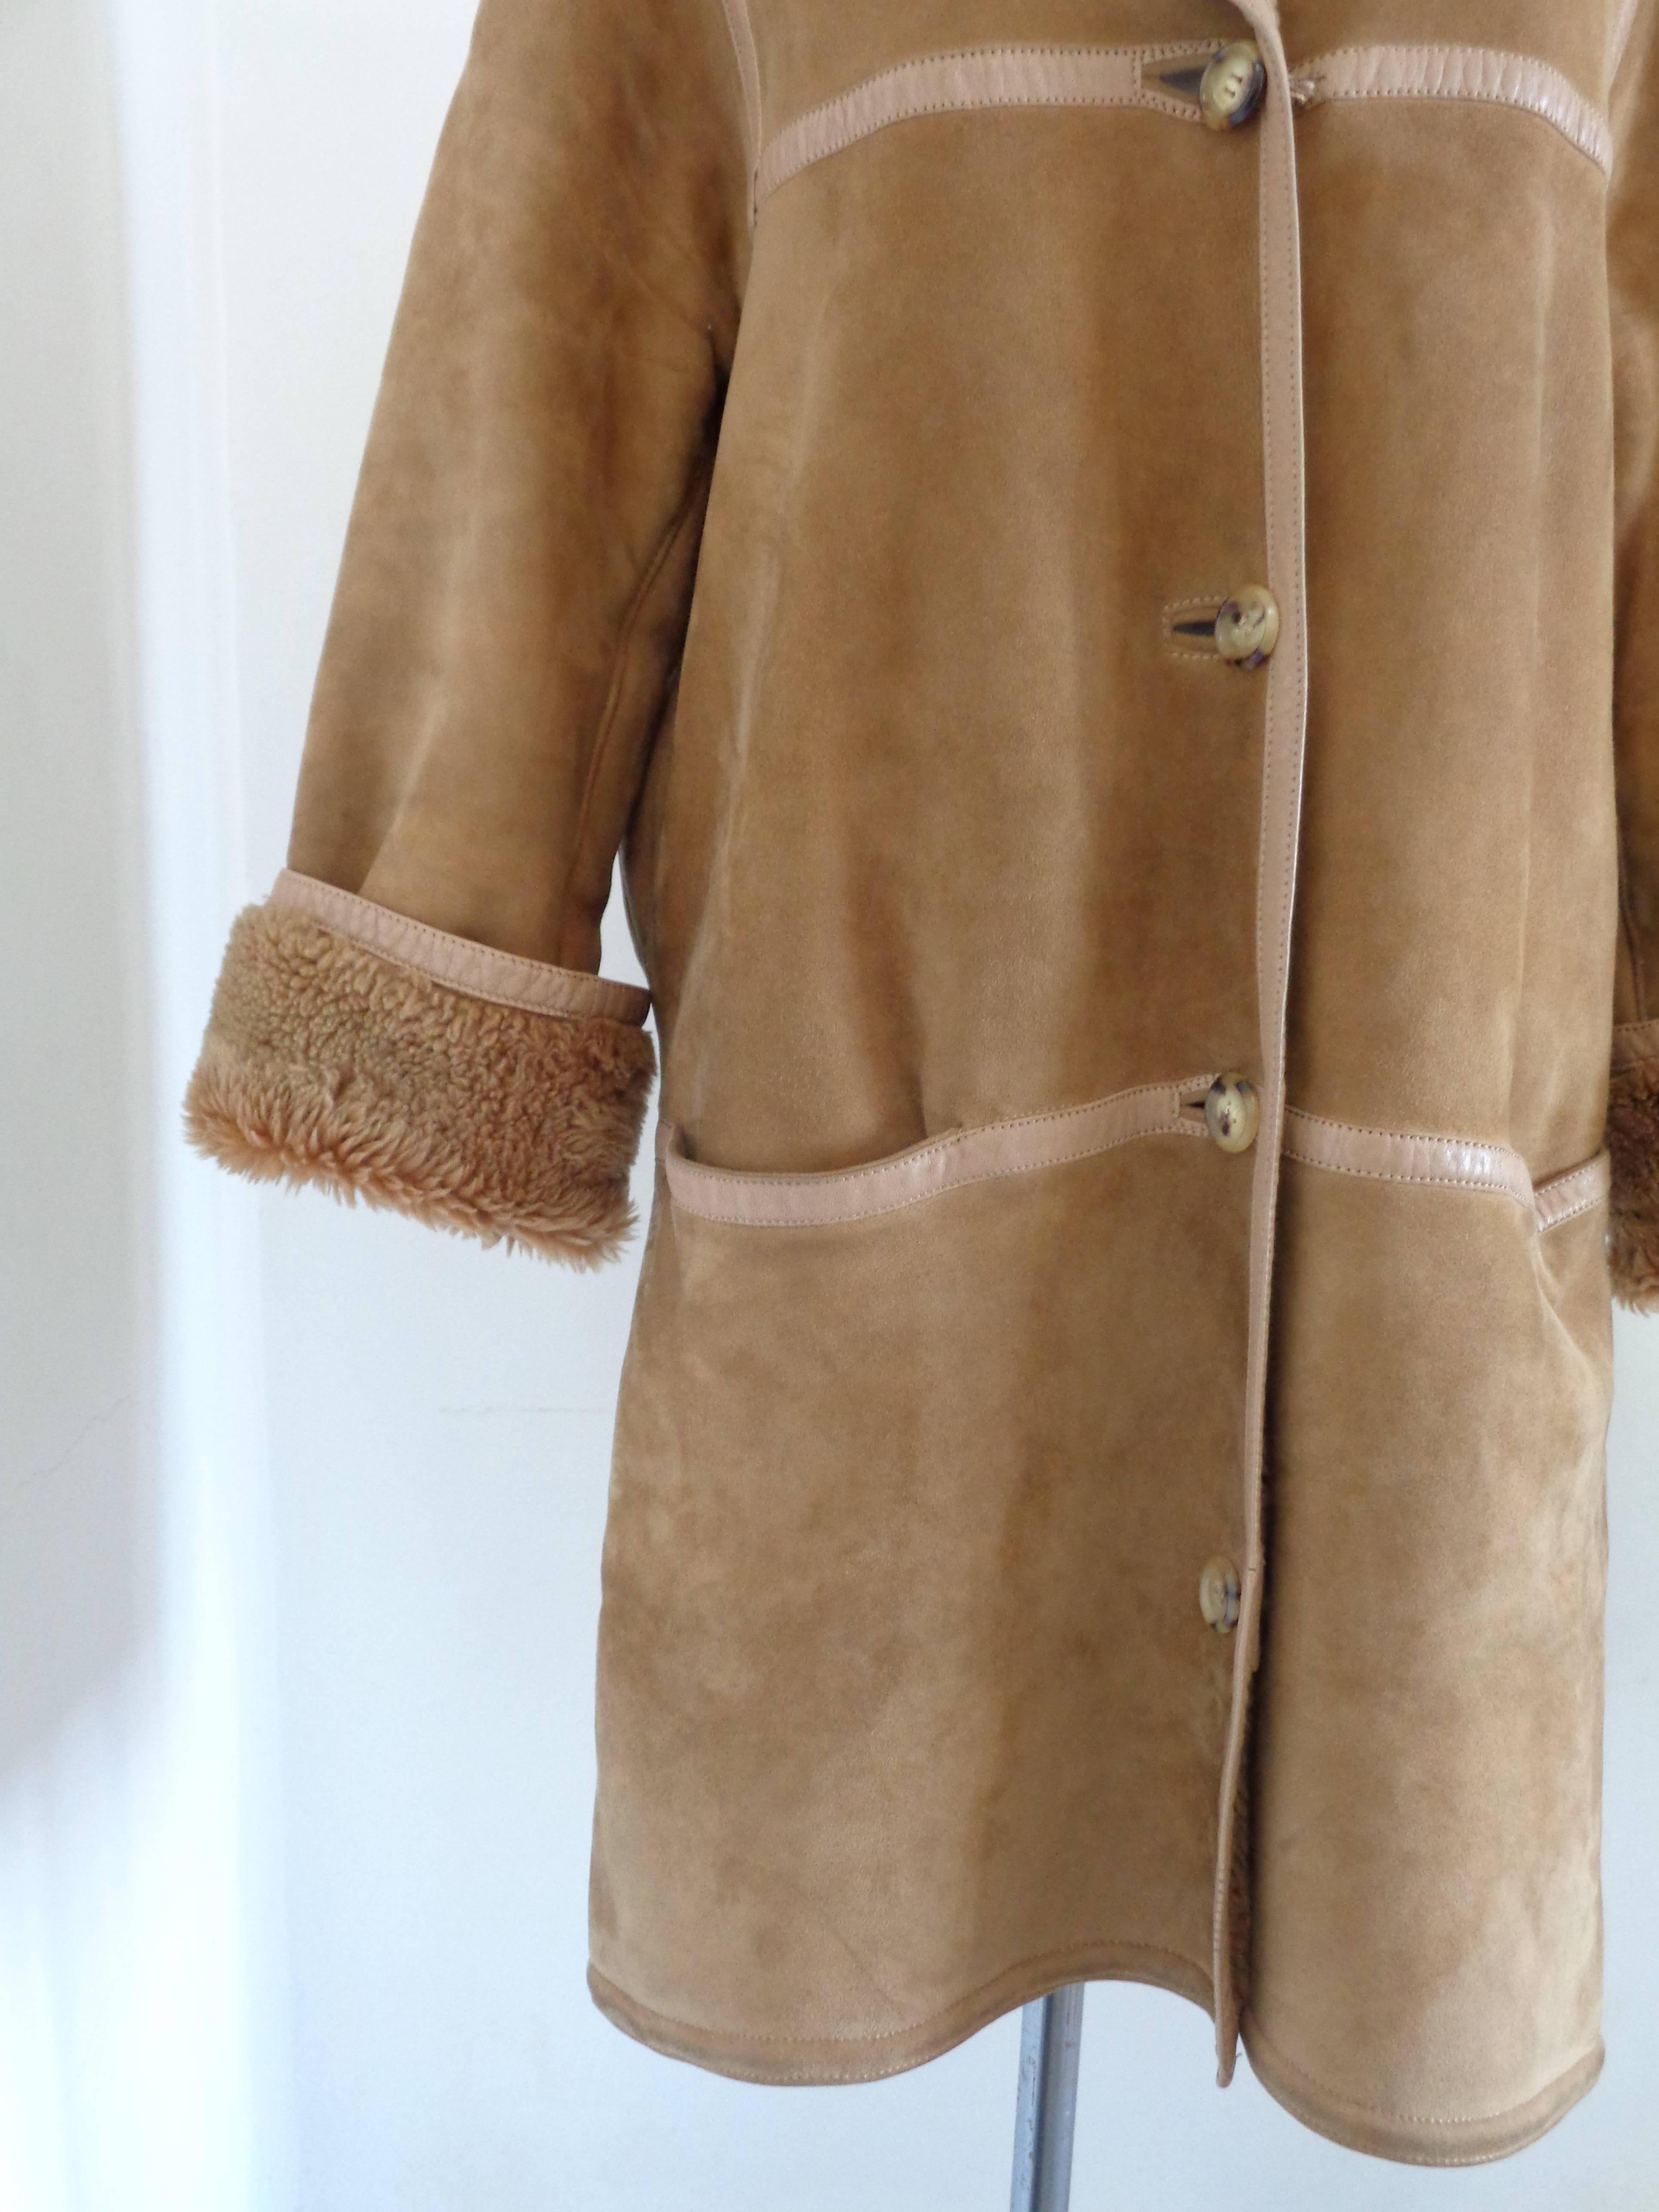 Rare Celine Paris Beije Mouton Sheep Coat

One of a kind Celine paris coat totally made in france in size 44